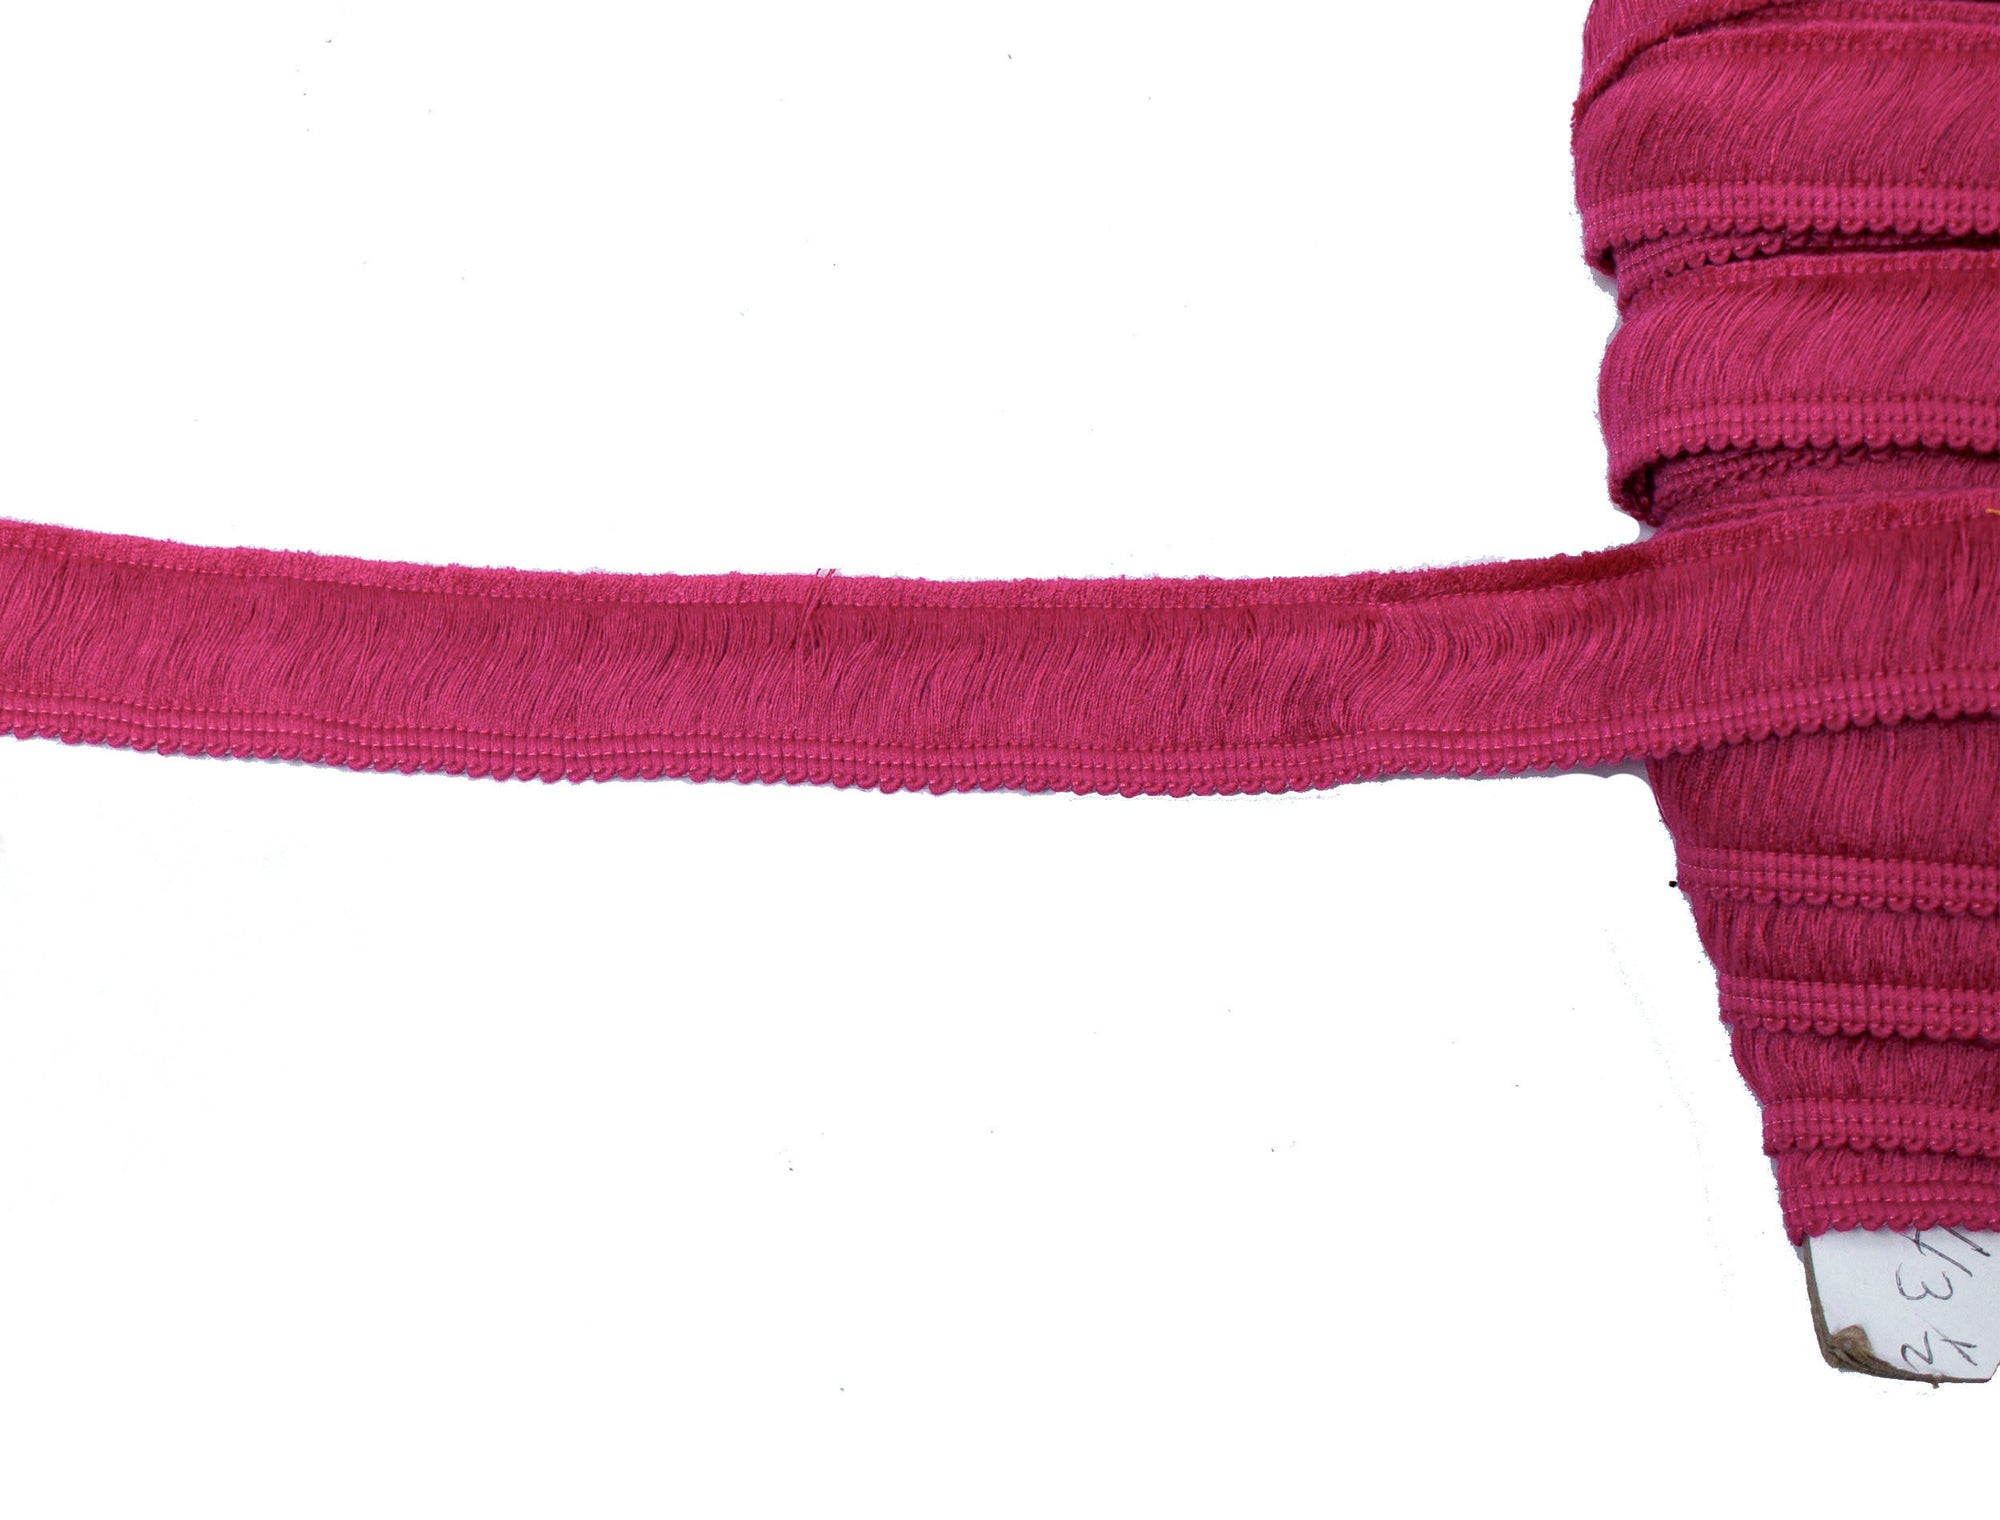 Cotton Fringe Shindo (SIC-4102) Fuchsia 1" Wide - Sold by the Yard